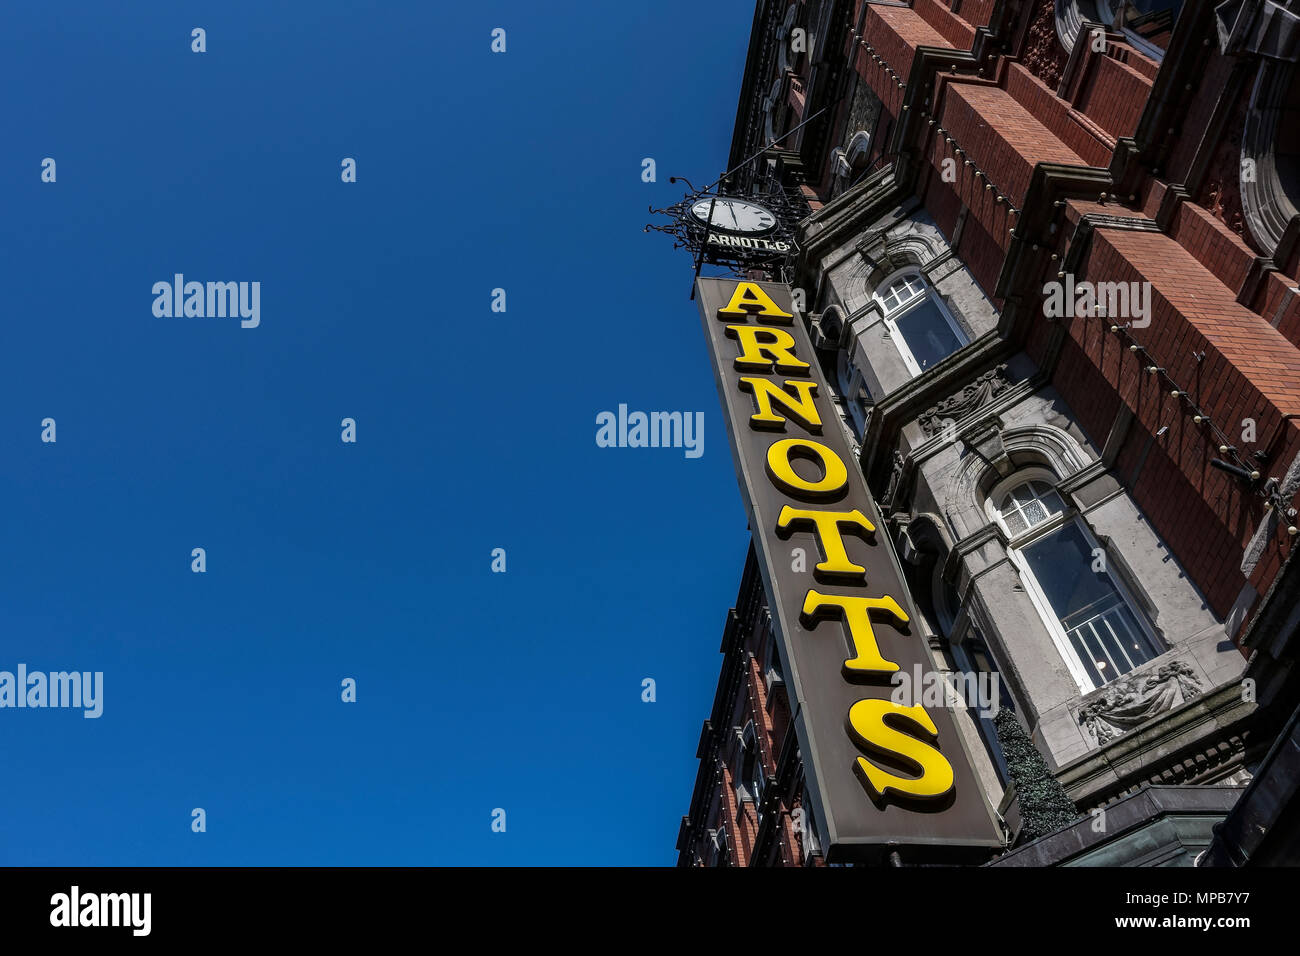 Shopping, Arnotts Department Store sign, brownstone building facade, Henry Street, Dublin, Ireland, Europe. Clear blue sky, copy space, low angle view Stock Photo